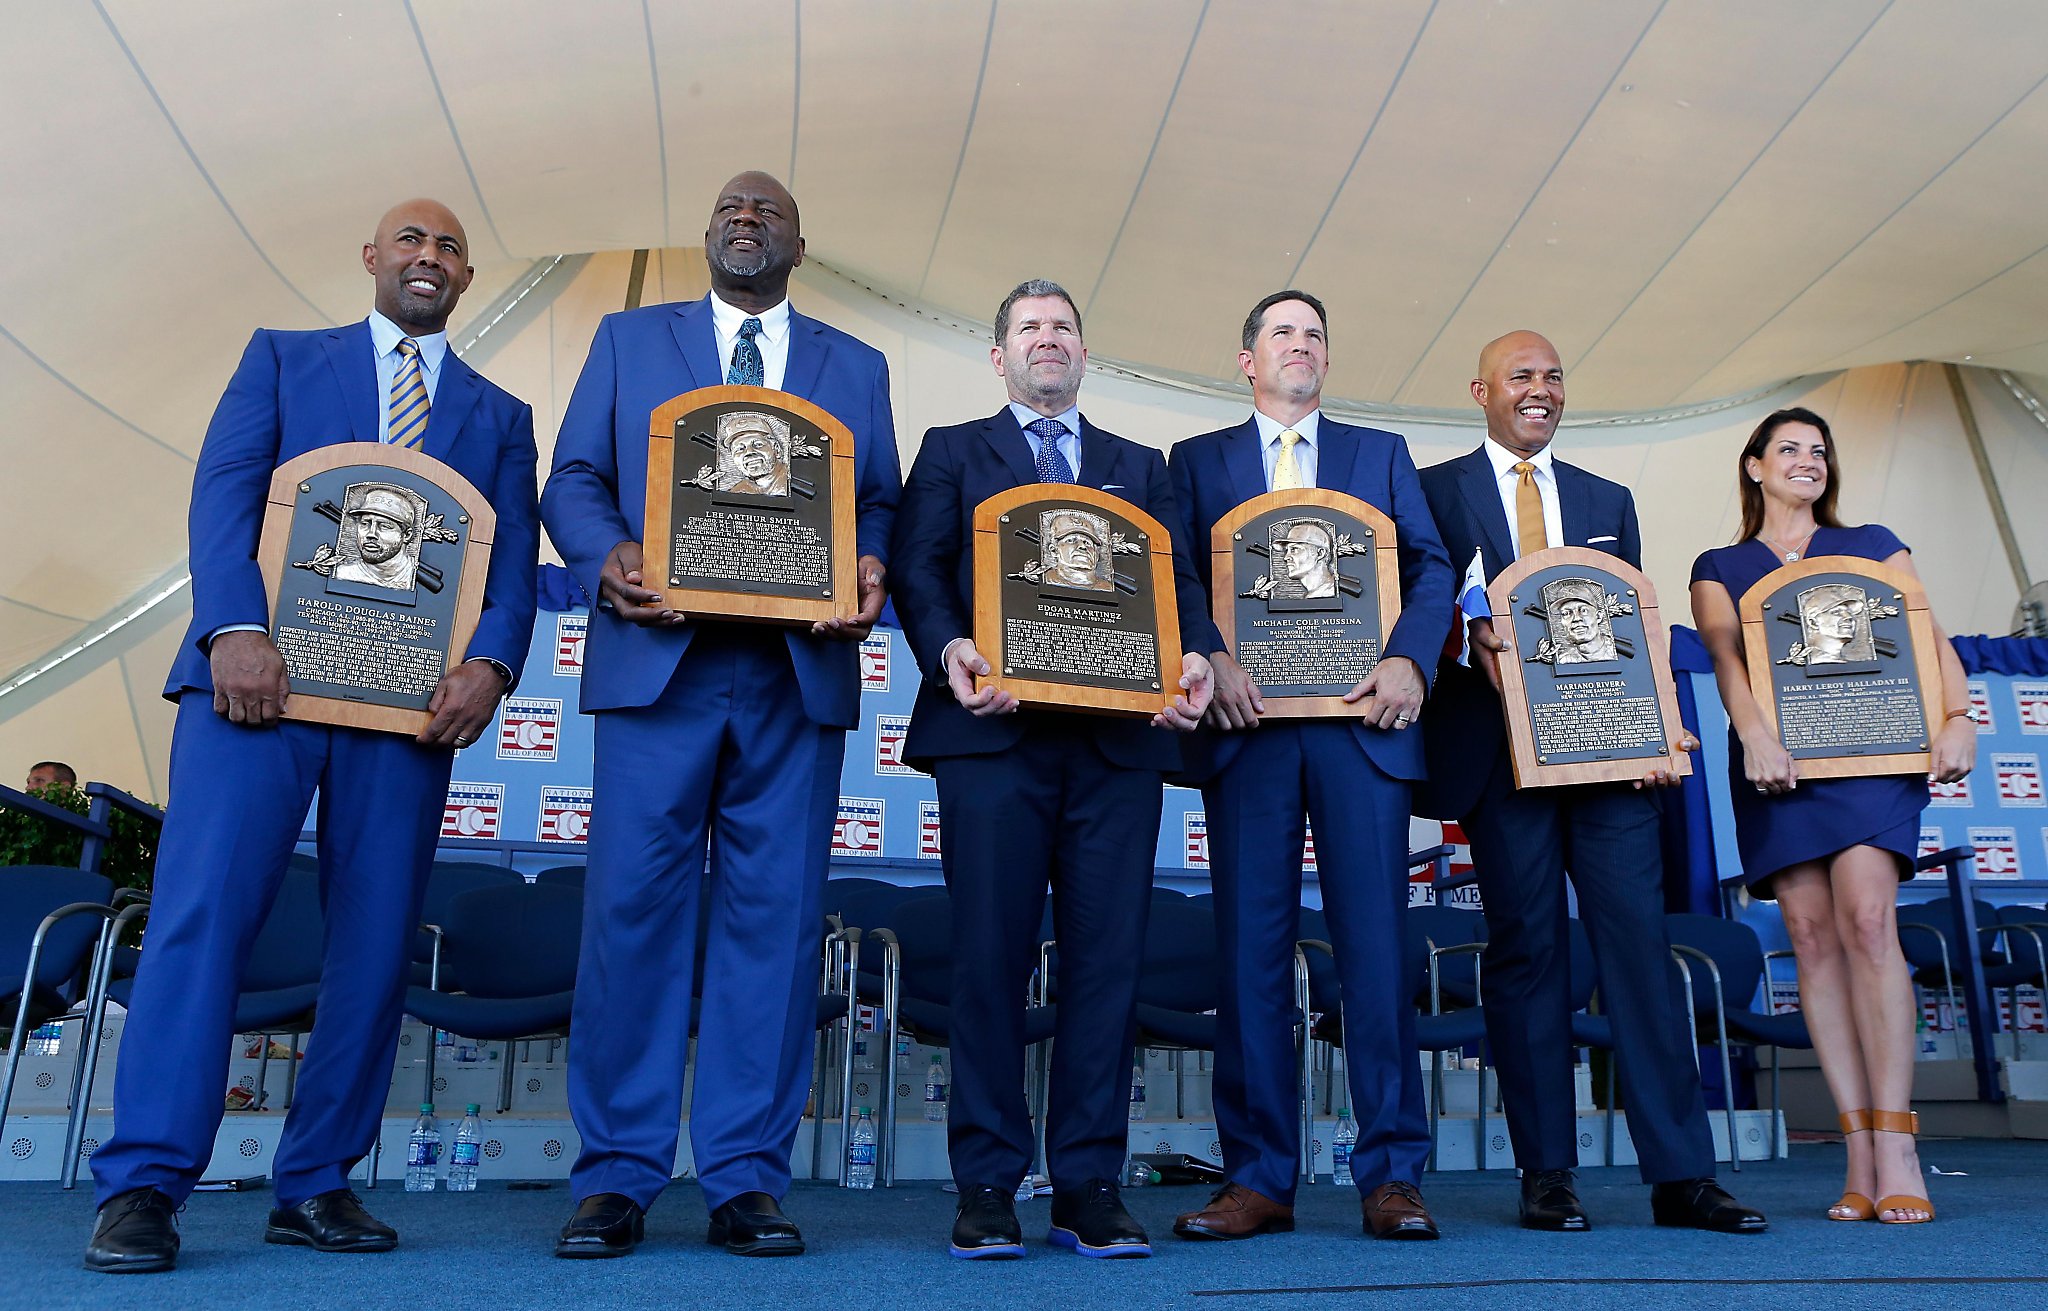 Mariano Rivera: 10 things to know about baseball's new Hall of Famer